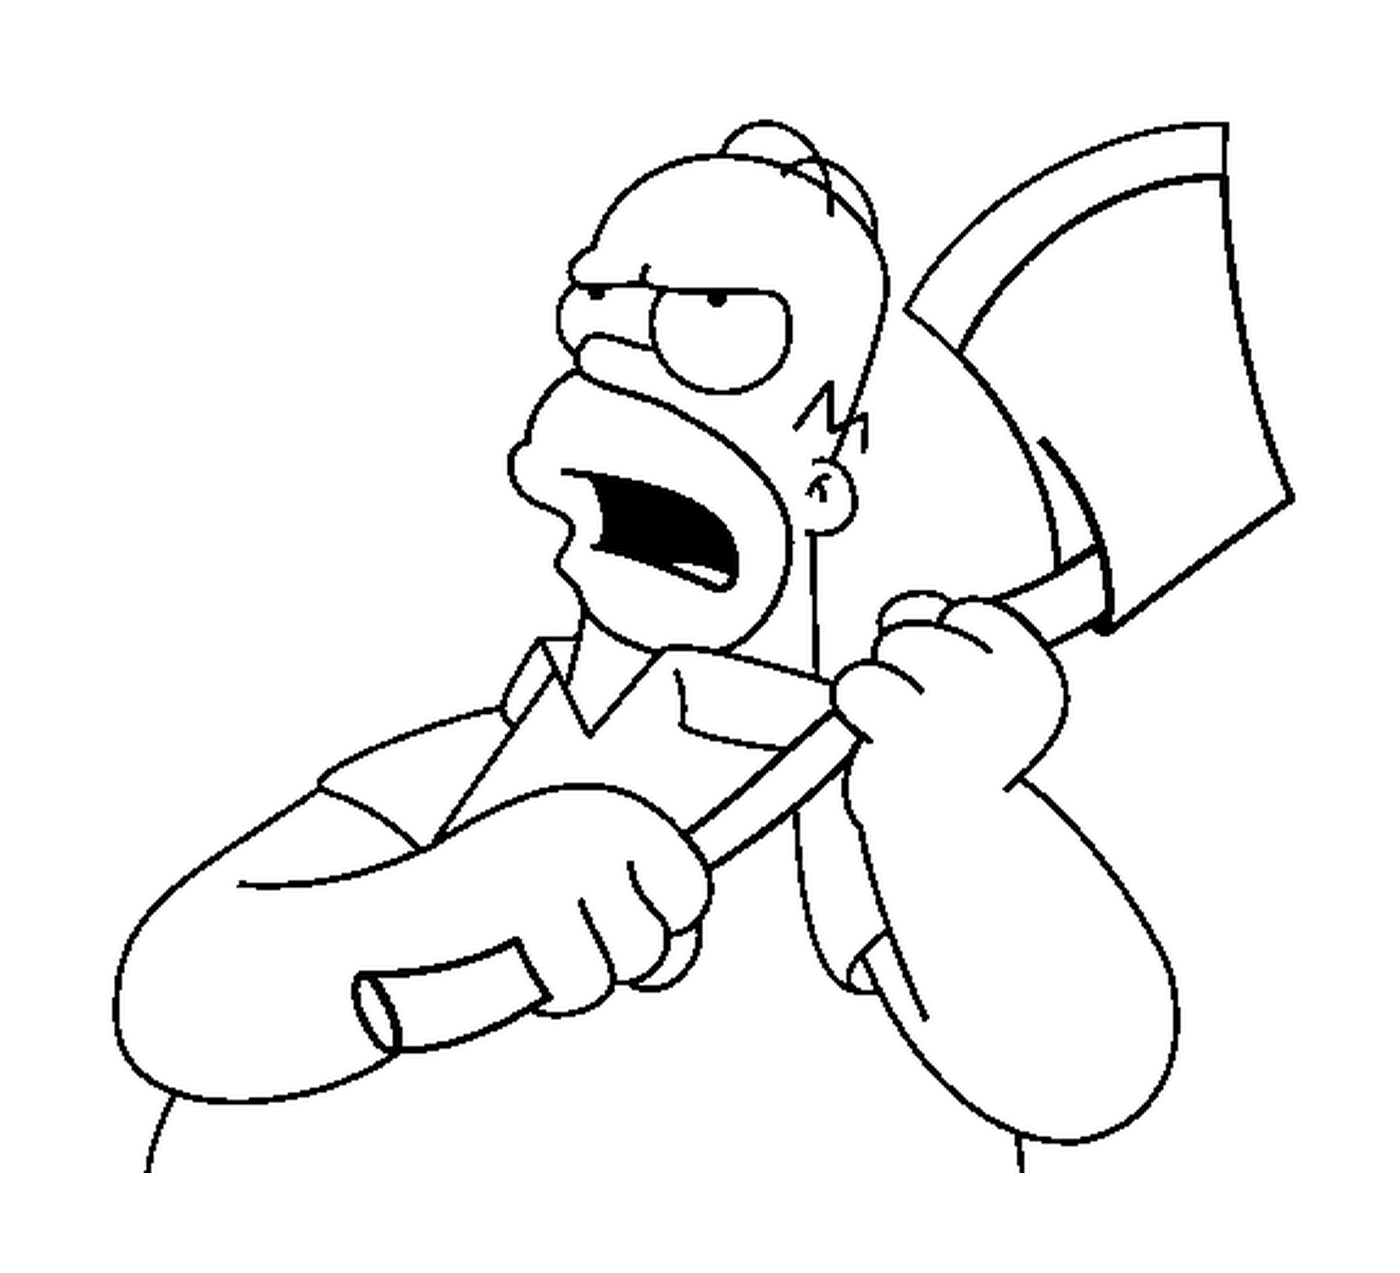  Homer with an axe in hand 